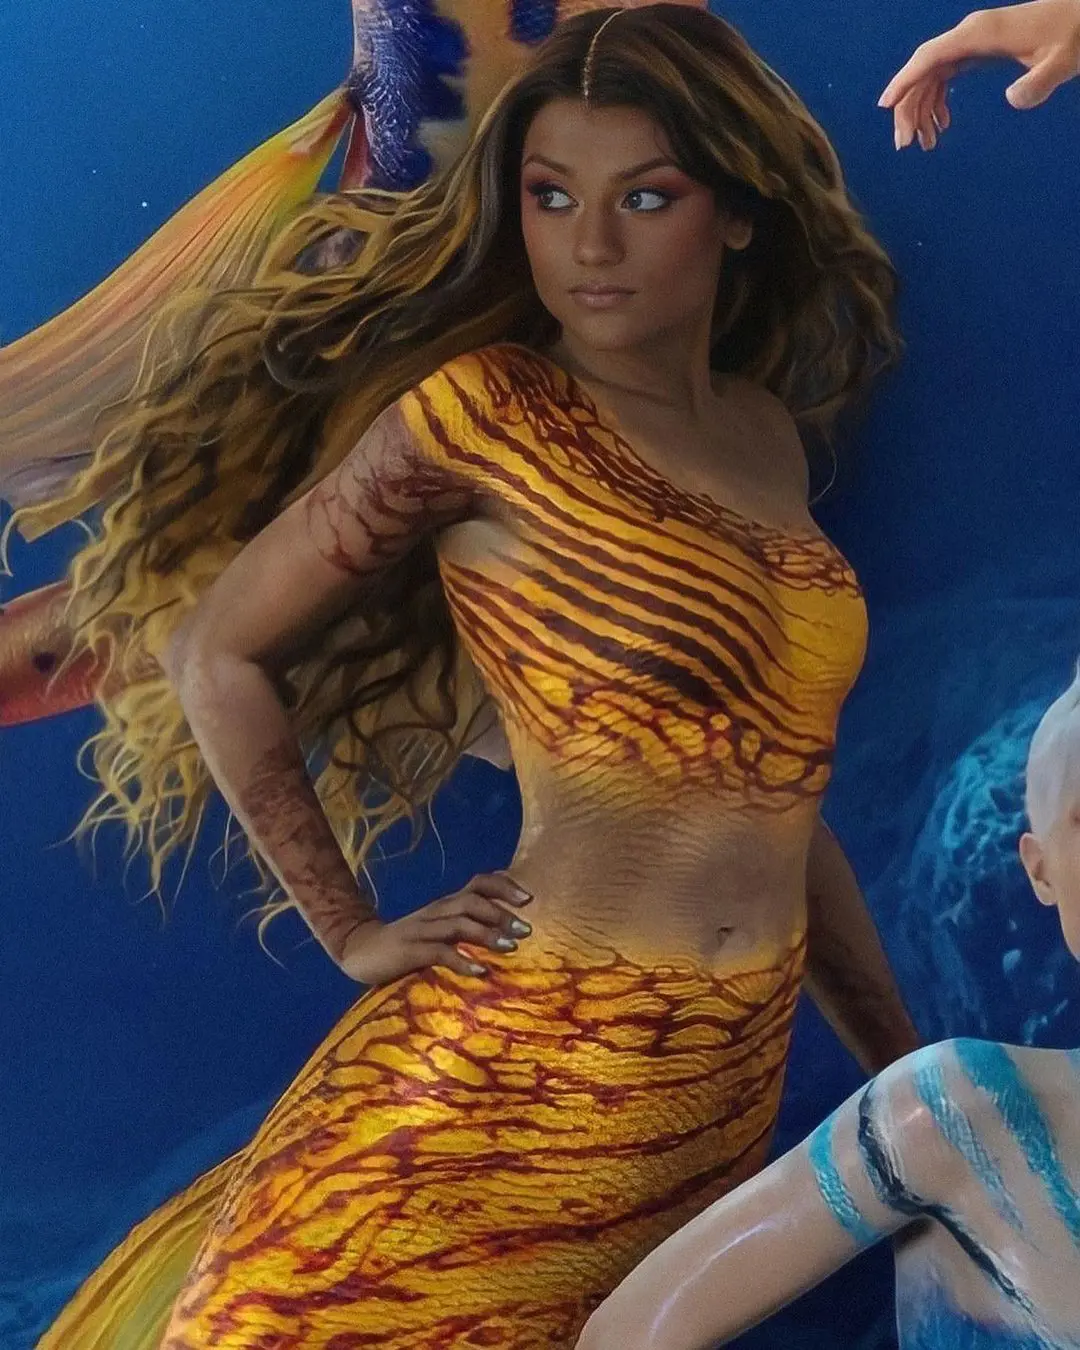 Indira is one of the Ariel's Mermaid sister and princess of Atlantica